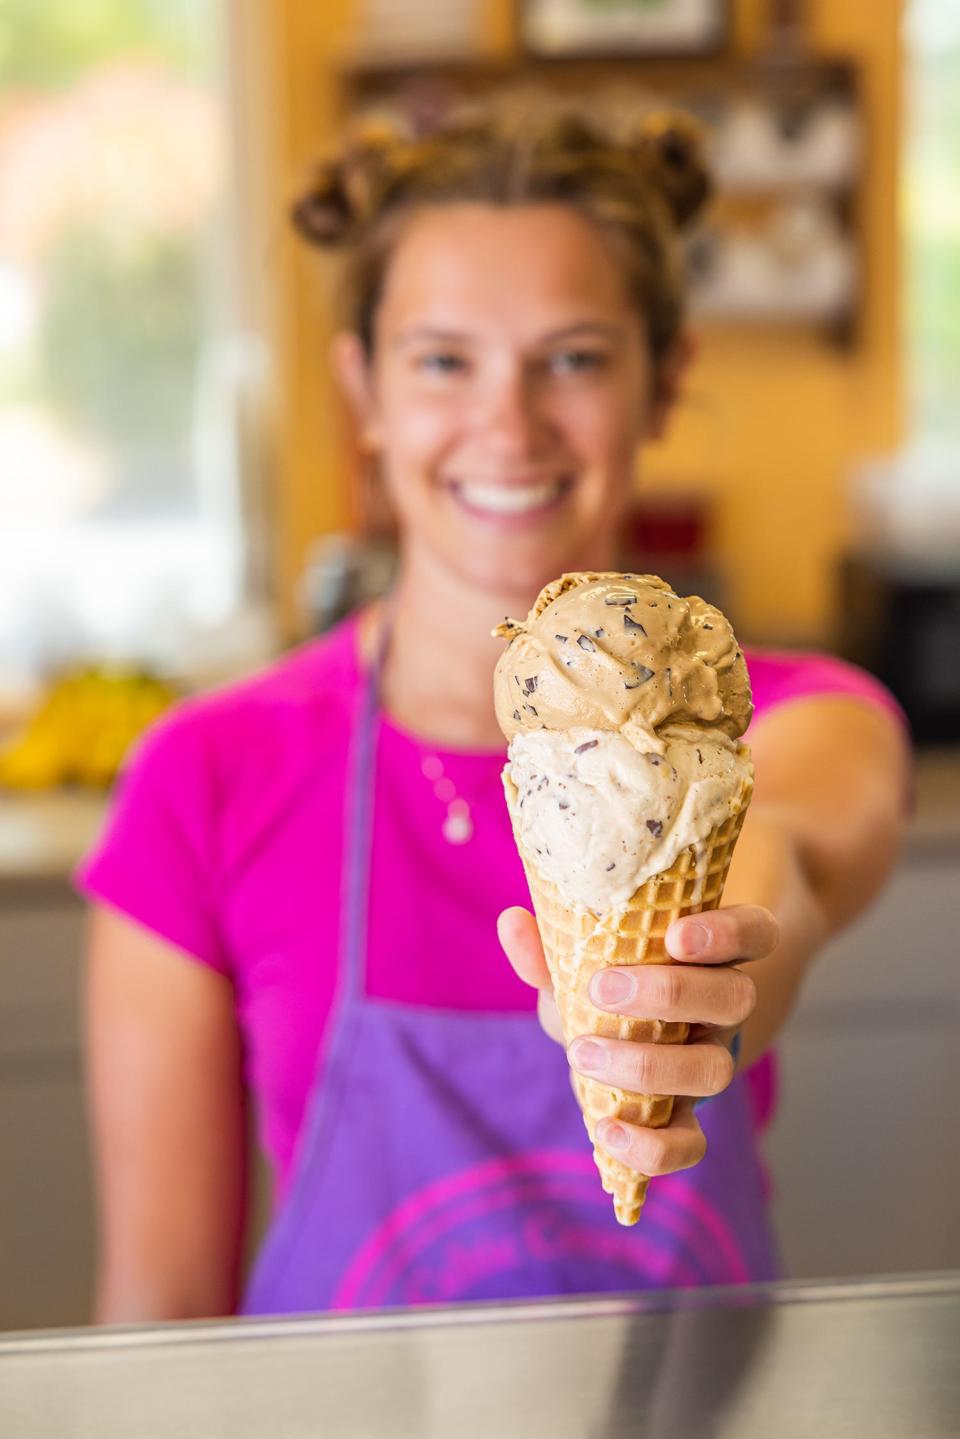 Celtic Creamery in Hendersonville is part of the Ice Cream Trail that debuted on June 1.